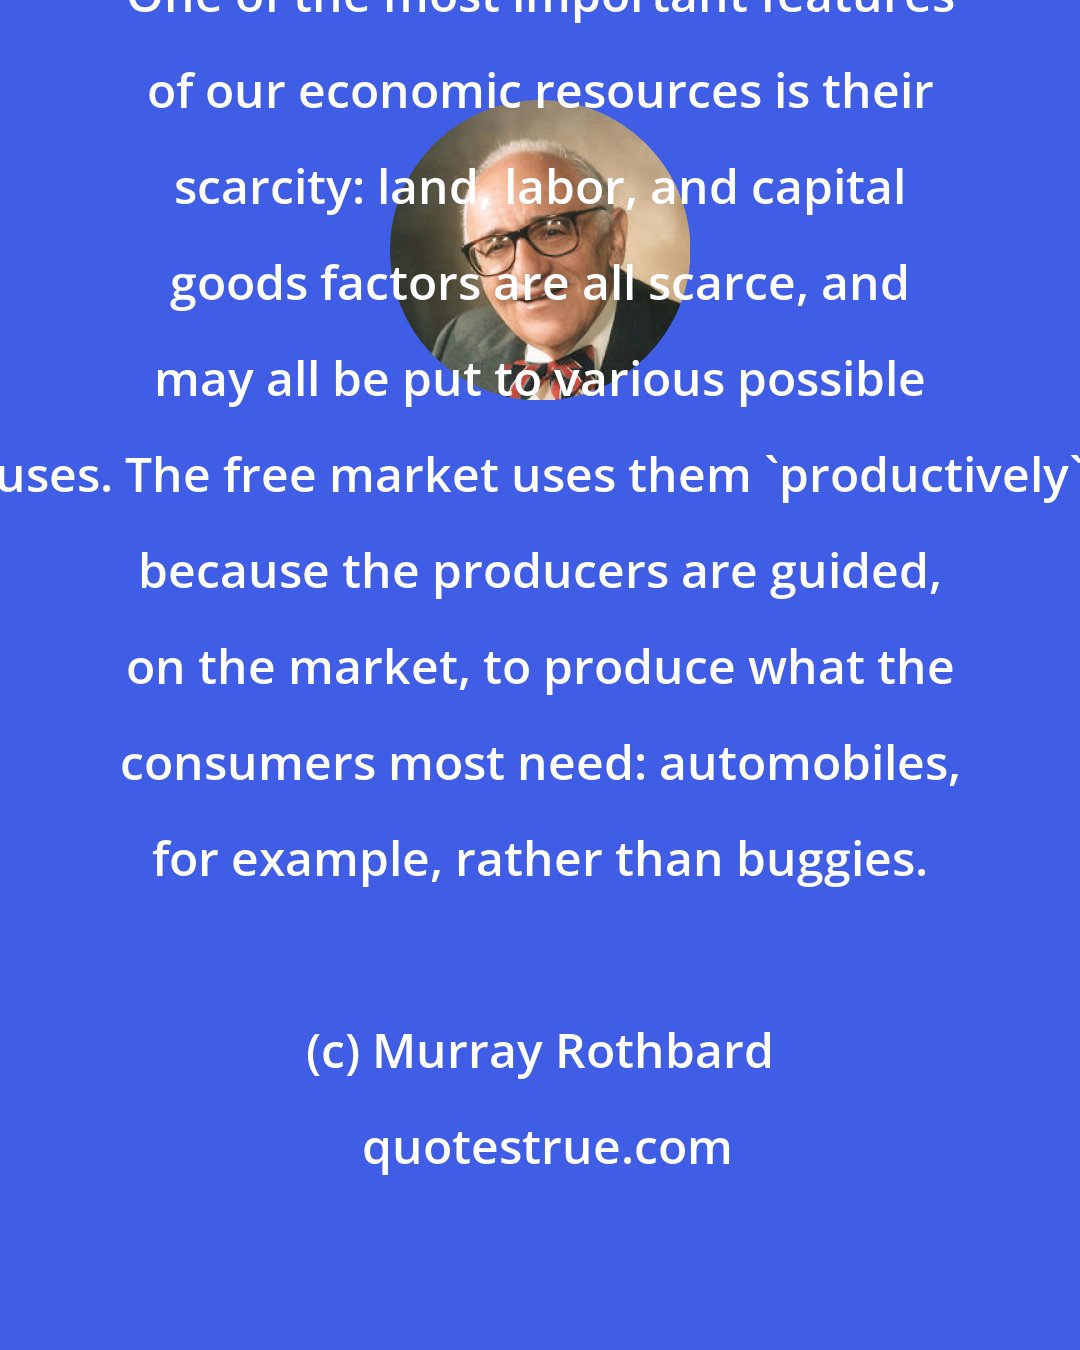 Murray Rothbard: One of the most important features of our economic resources is their scarcity: land, labor, and capital goods factors are all scarce, and may all be put to various possible uses. The free market uses them 'productively' because the producers are guided, on the market, to produce what the consumers most need: automobiles, for example, rather than buggies.